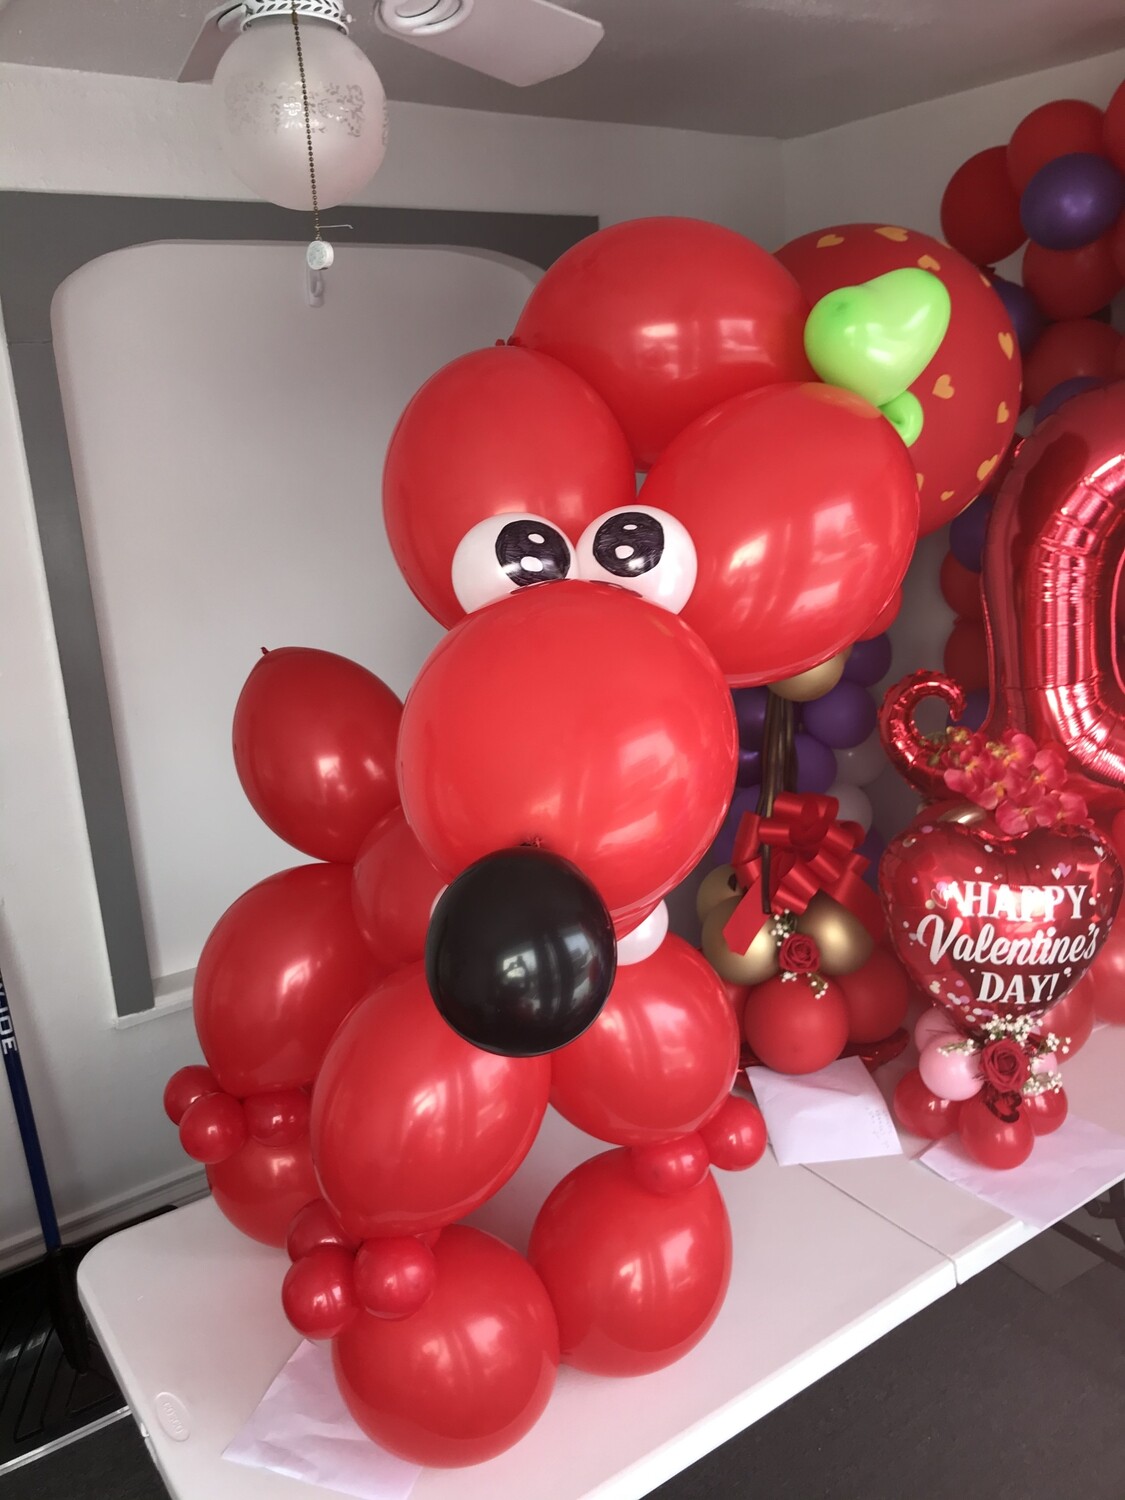 Giant balloon dog poodle, great valentine or birthday balloon gift